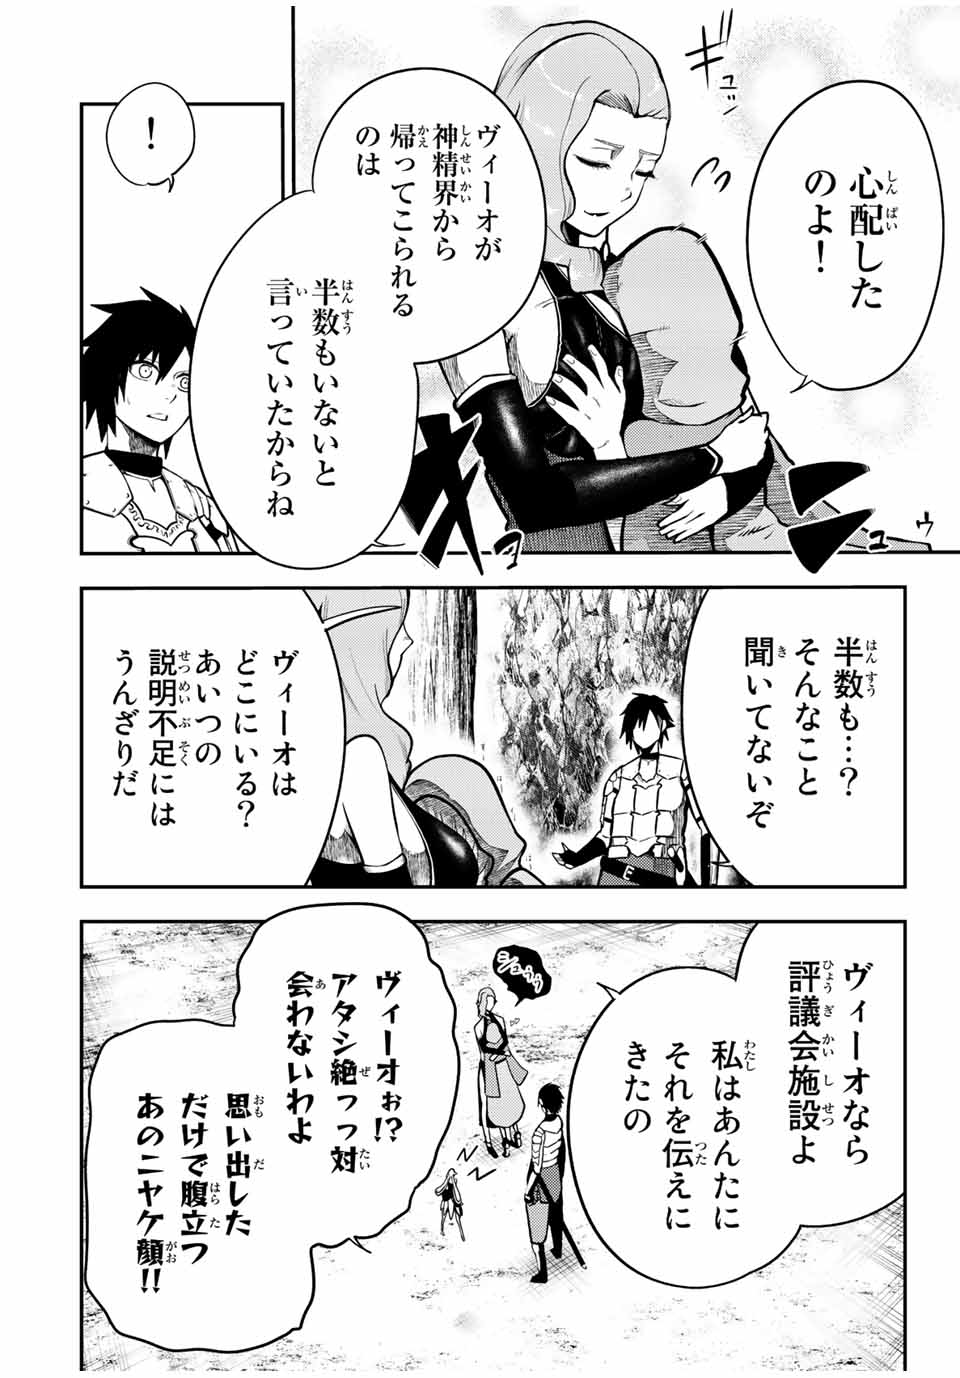 the strongest former prince-; 奴隷転生 ～その奴隷、最強の元王子につき～ 第78話 - Page 6